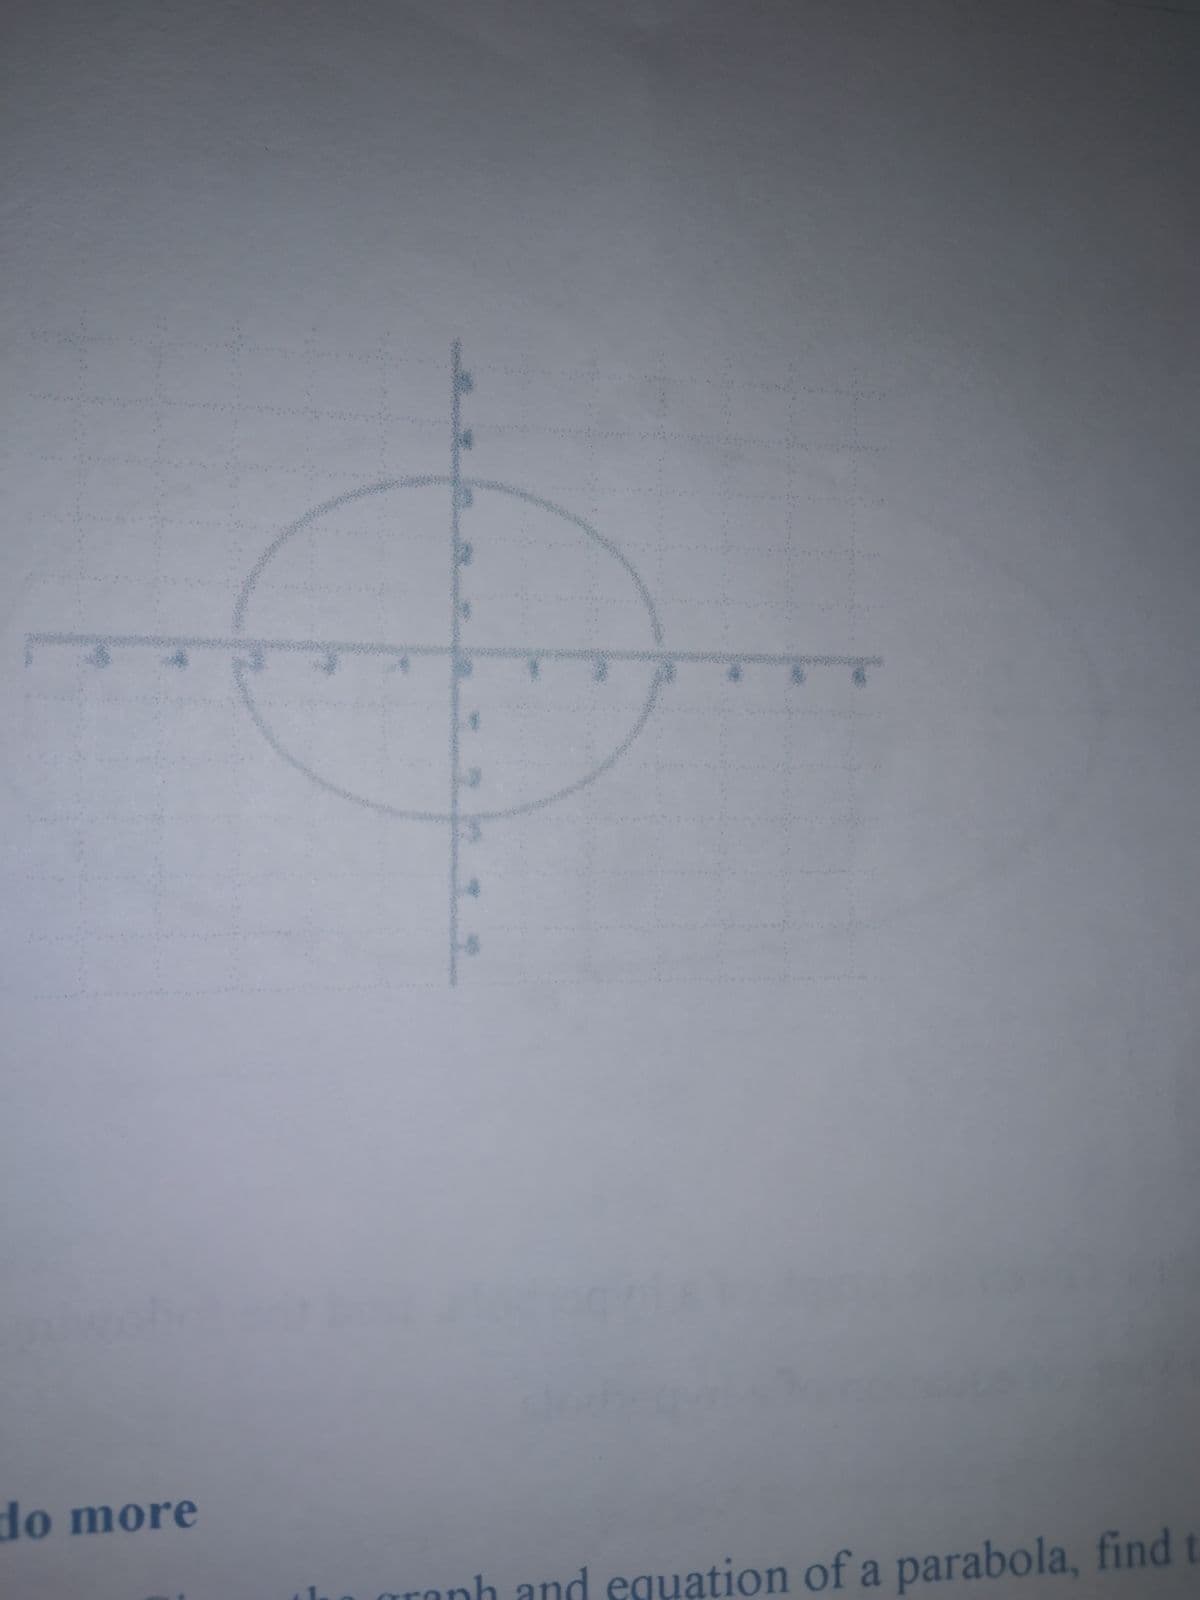 do more
aronh and equation of a parabola, find t
